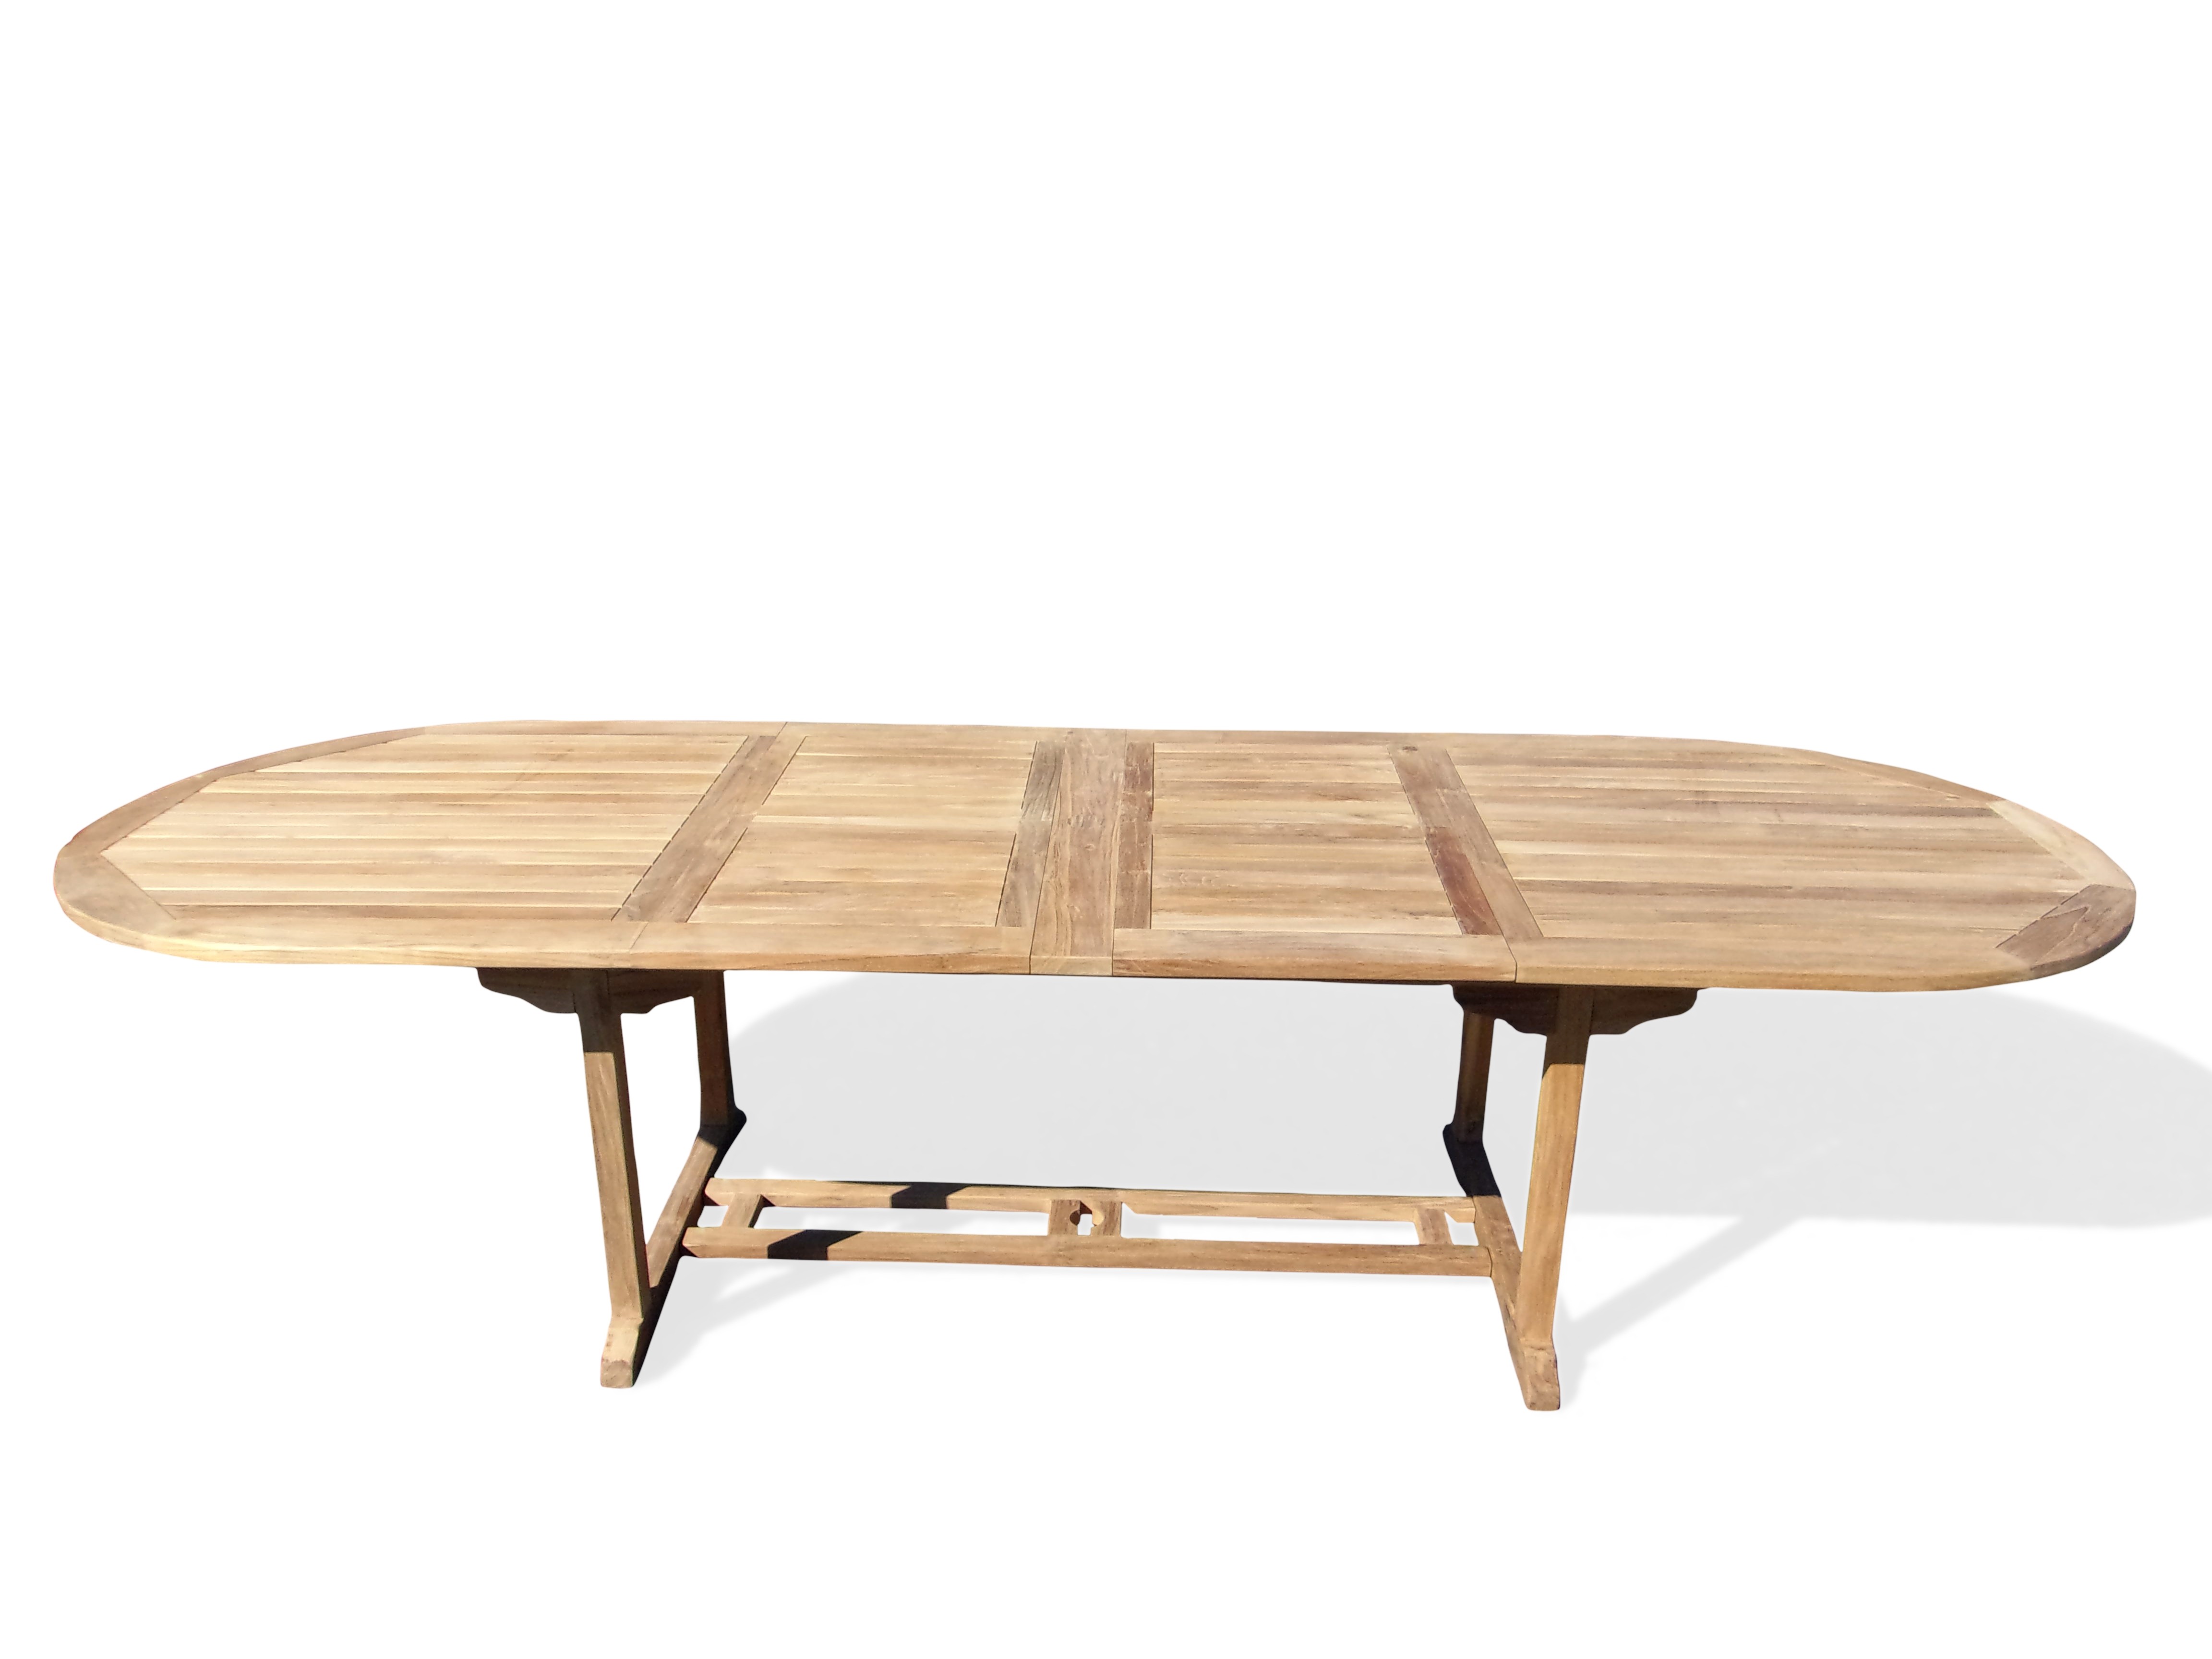 Buckingham 118" x 39" Oval Double Leaf Extension Table...Seats 10-12...makes 3 Different Size Tables